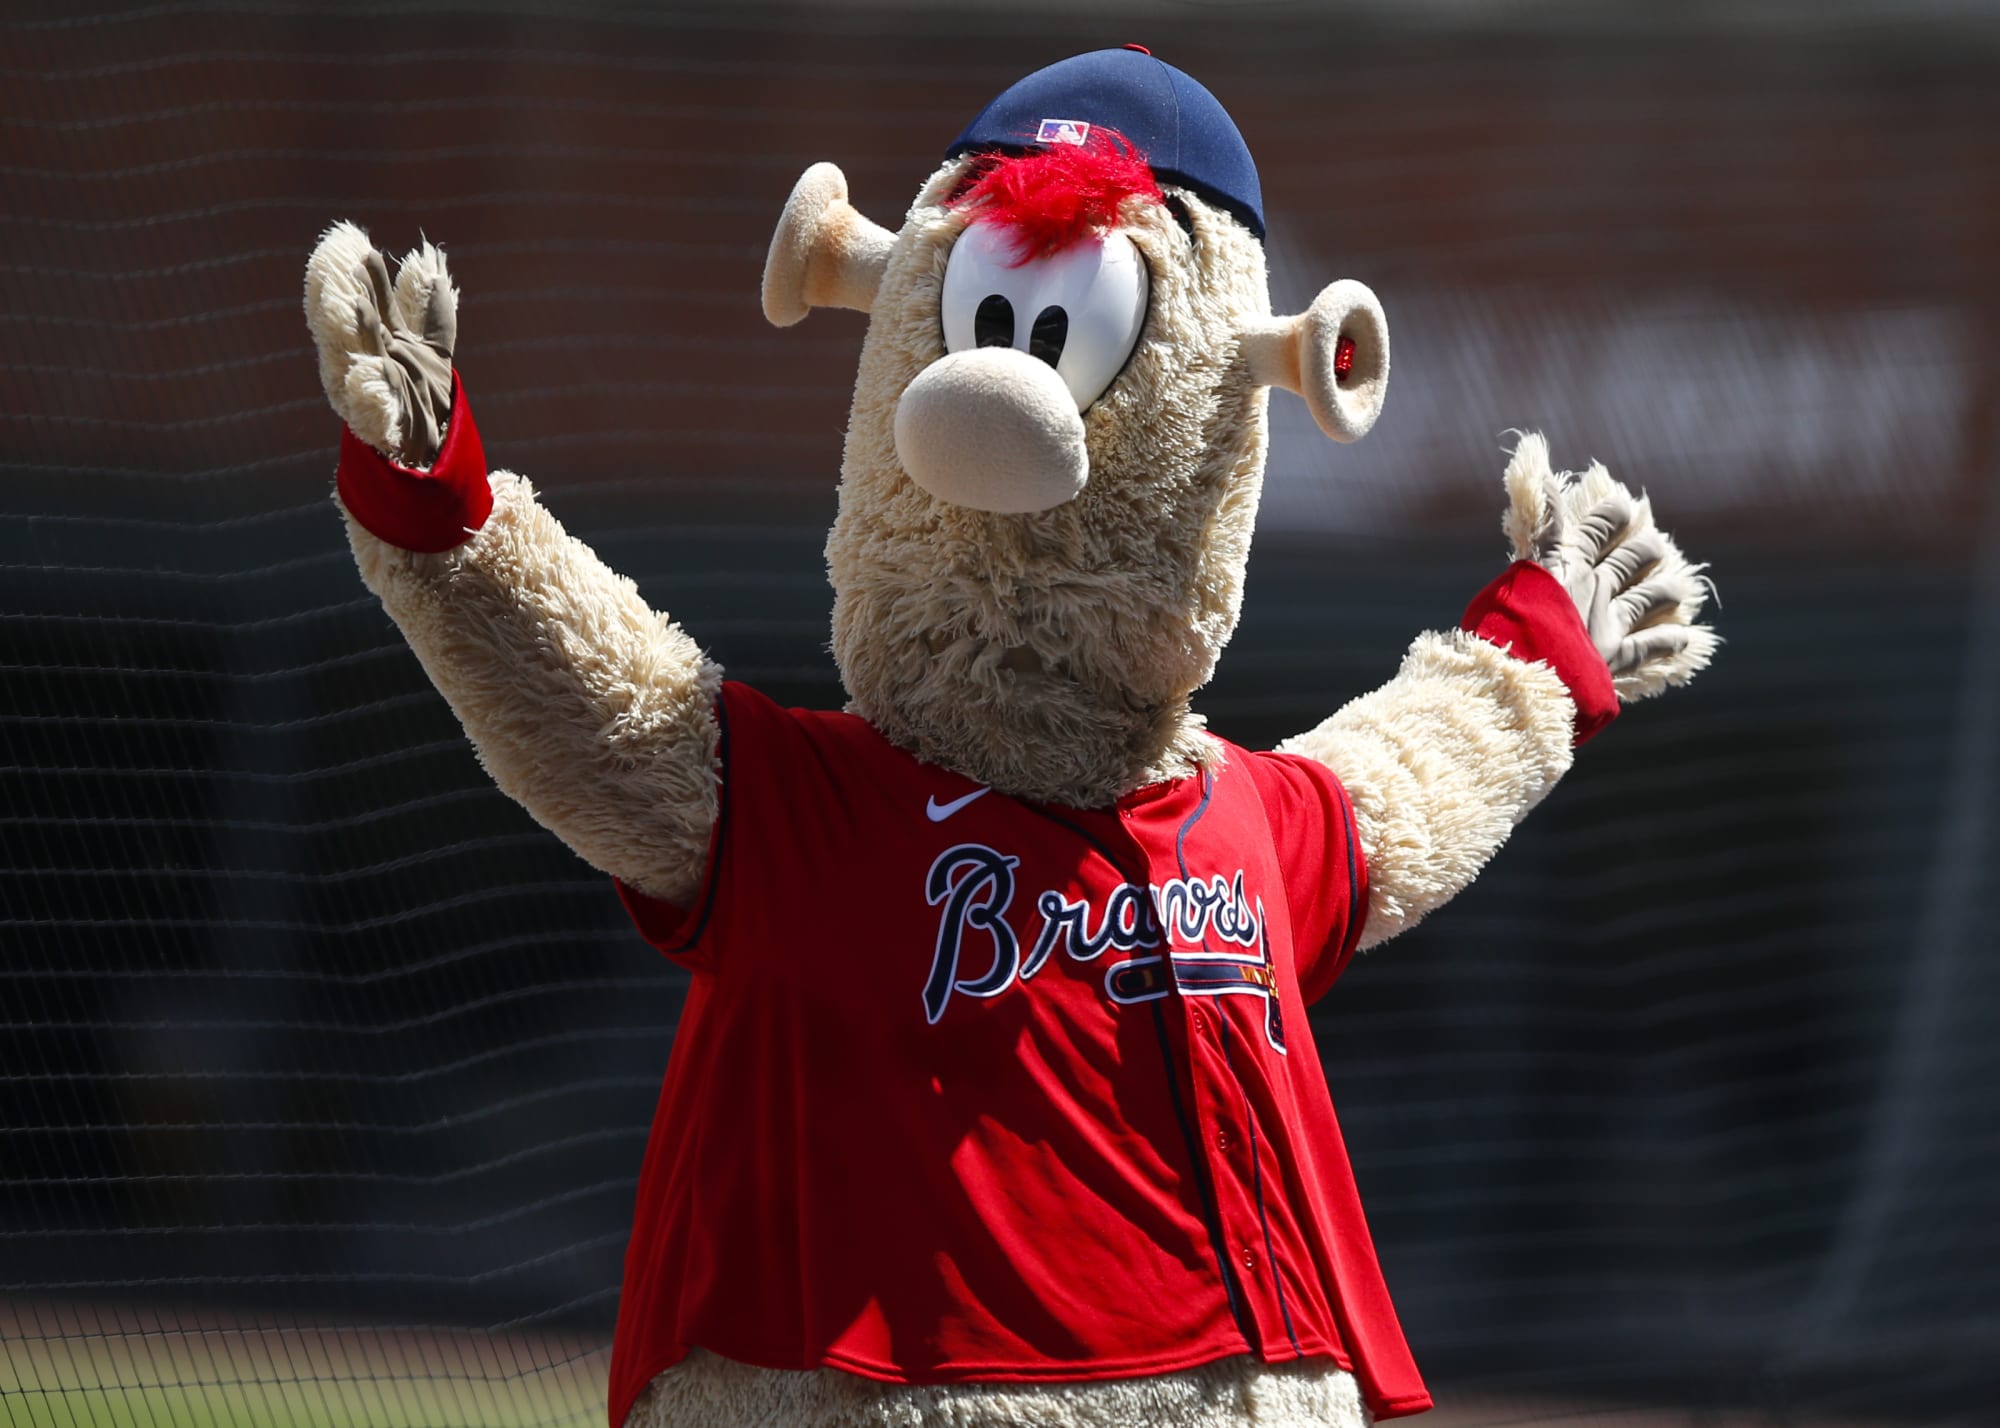 Braves mascot Blooper needs a Falcons tryout after this hit stick